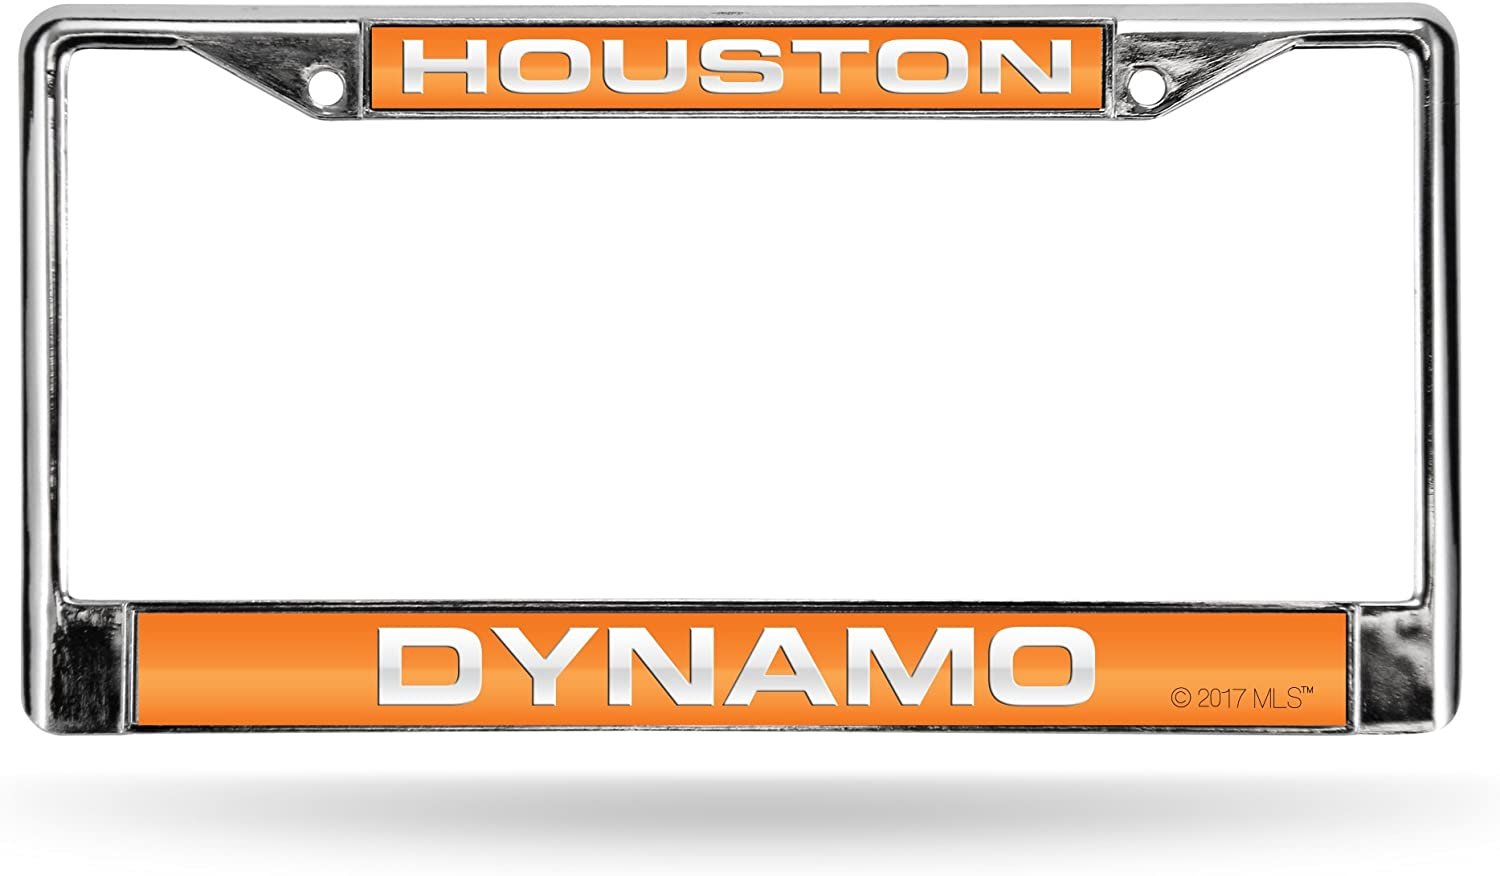 Houston Dynamo MLS Chrome Metal License Plate Frame Tag Cover, Laser Acrylic Mirrored Inserts, 12x6 Inch